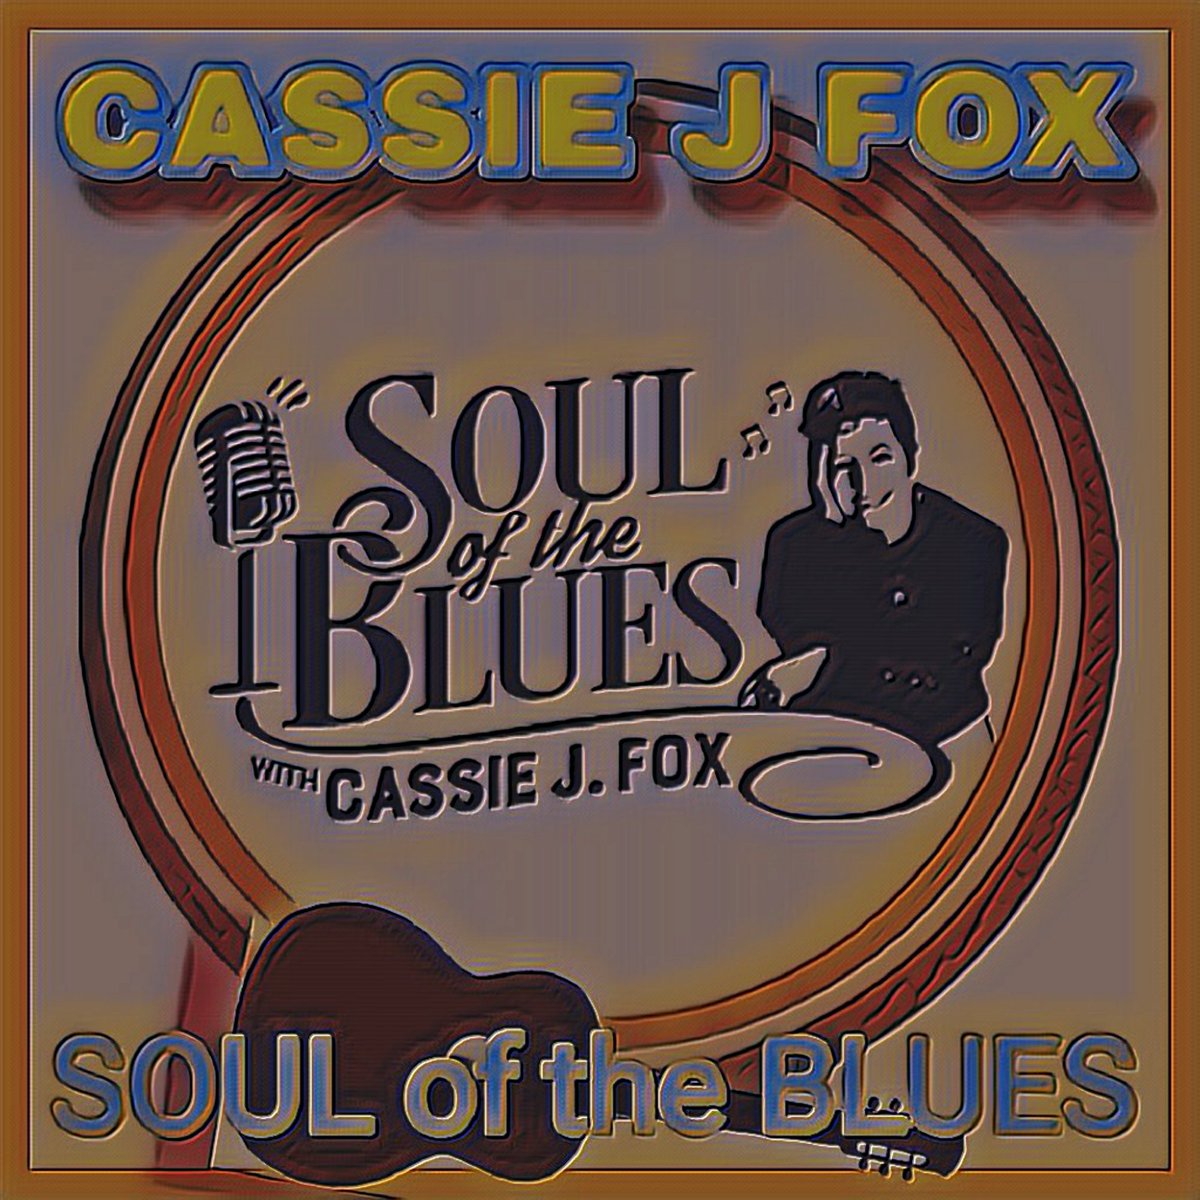 #SundayBest Live Radio From The Whitty City Of SC @ 3-6pm ET 'Soul Of The Blues With Cassie CJ Fox' ourgenerationradio.com  App 4 download tunein.com #WhitmireSC #SouthernSounds #LitNLive #SouthernCharm #CassieJFox #SouthernStyle #SouthCarolina803 #GrownFolksMusic